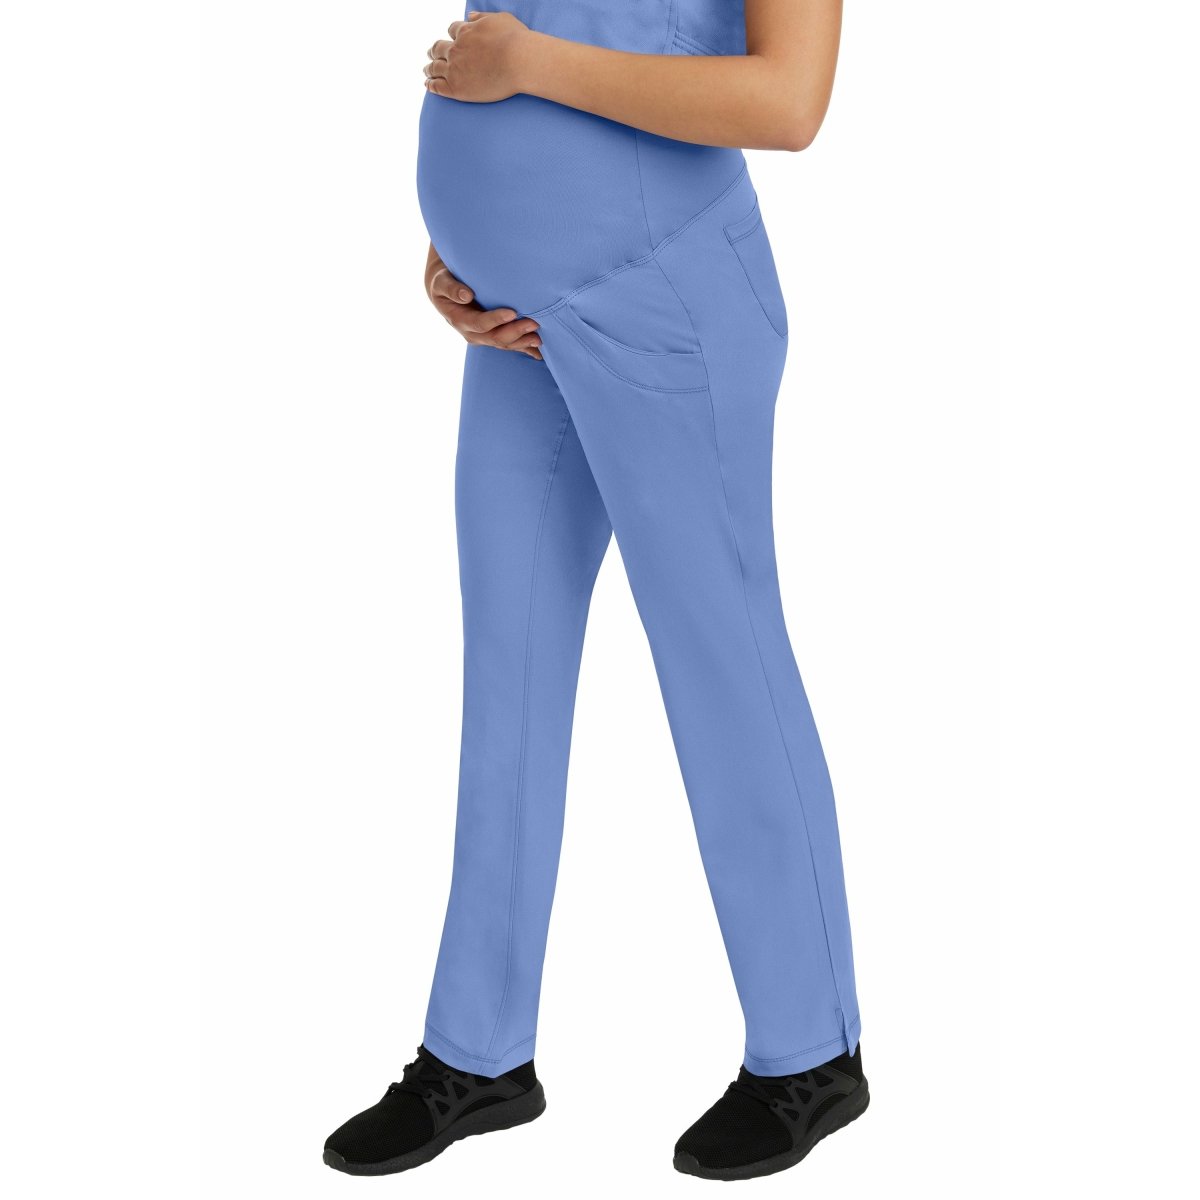 TUOBARR Maternity Clothes Maternity Women's Solid Color Casual Pants  Stretchy Comfortable Lounge Pants 